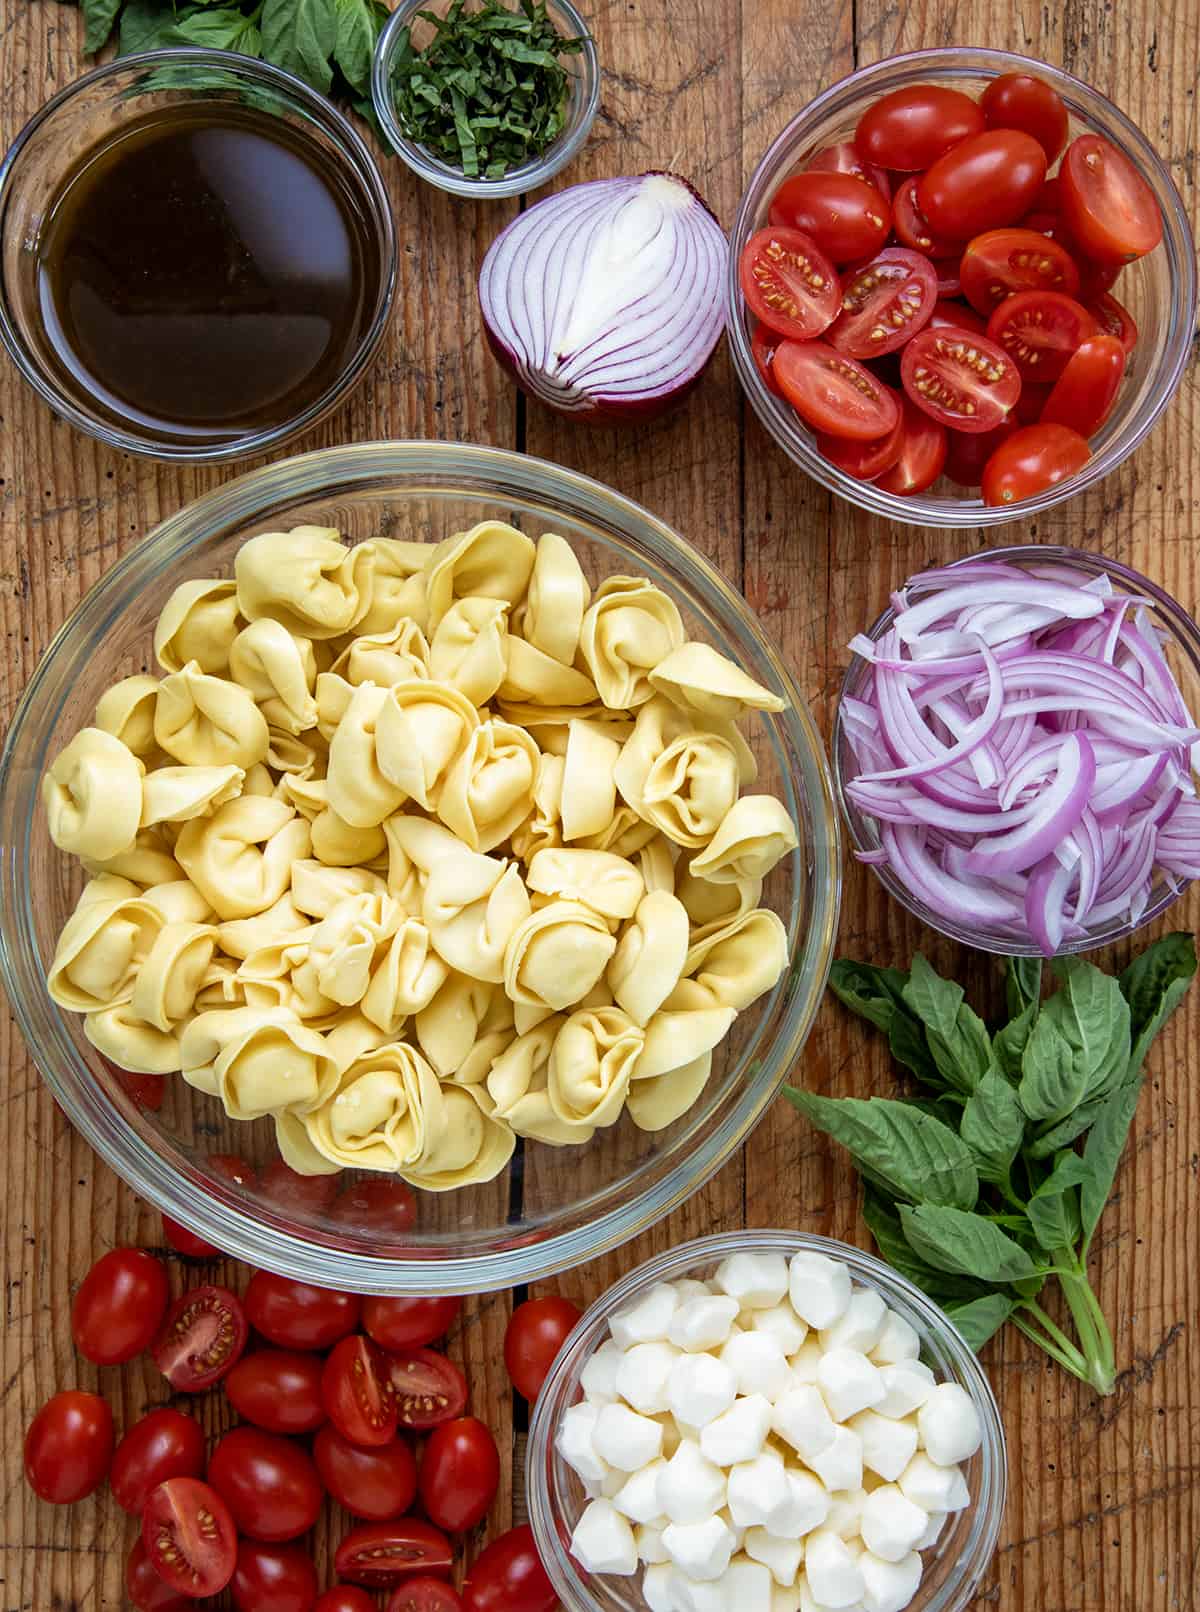 Ingredients used to make Caprese Tortellini Pasta Salad on a wooden table.